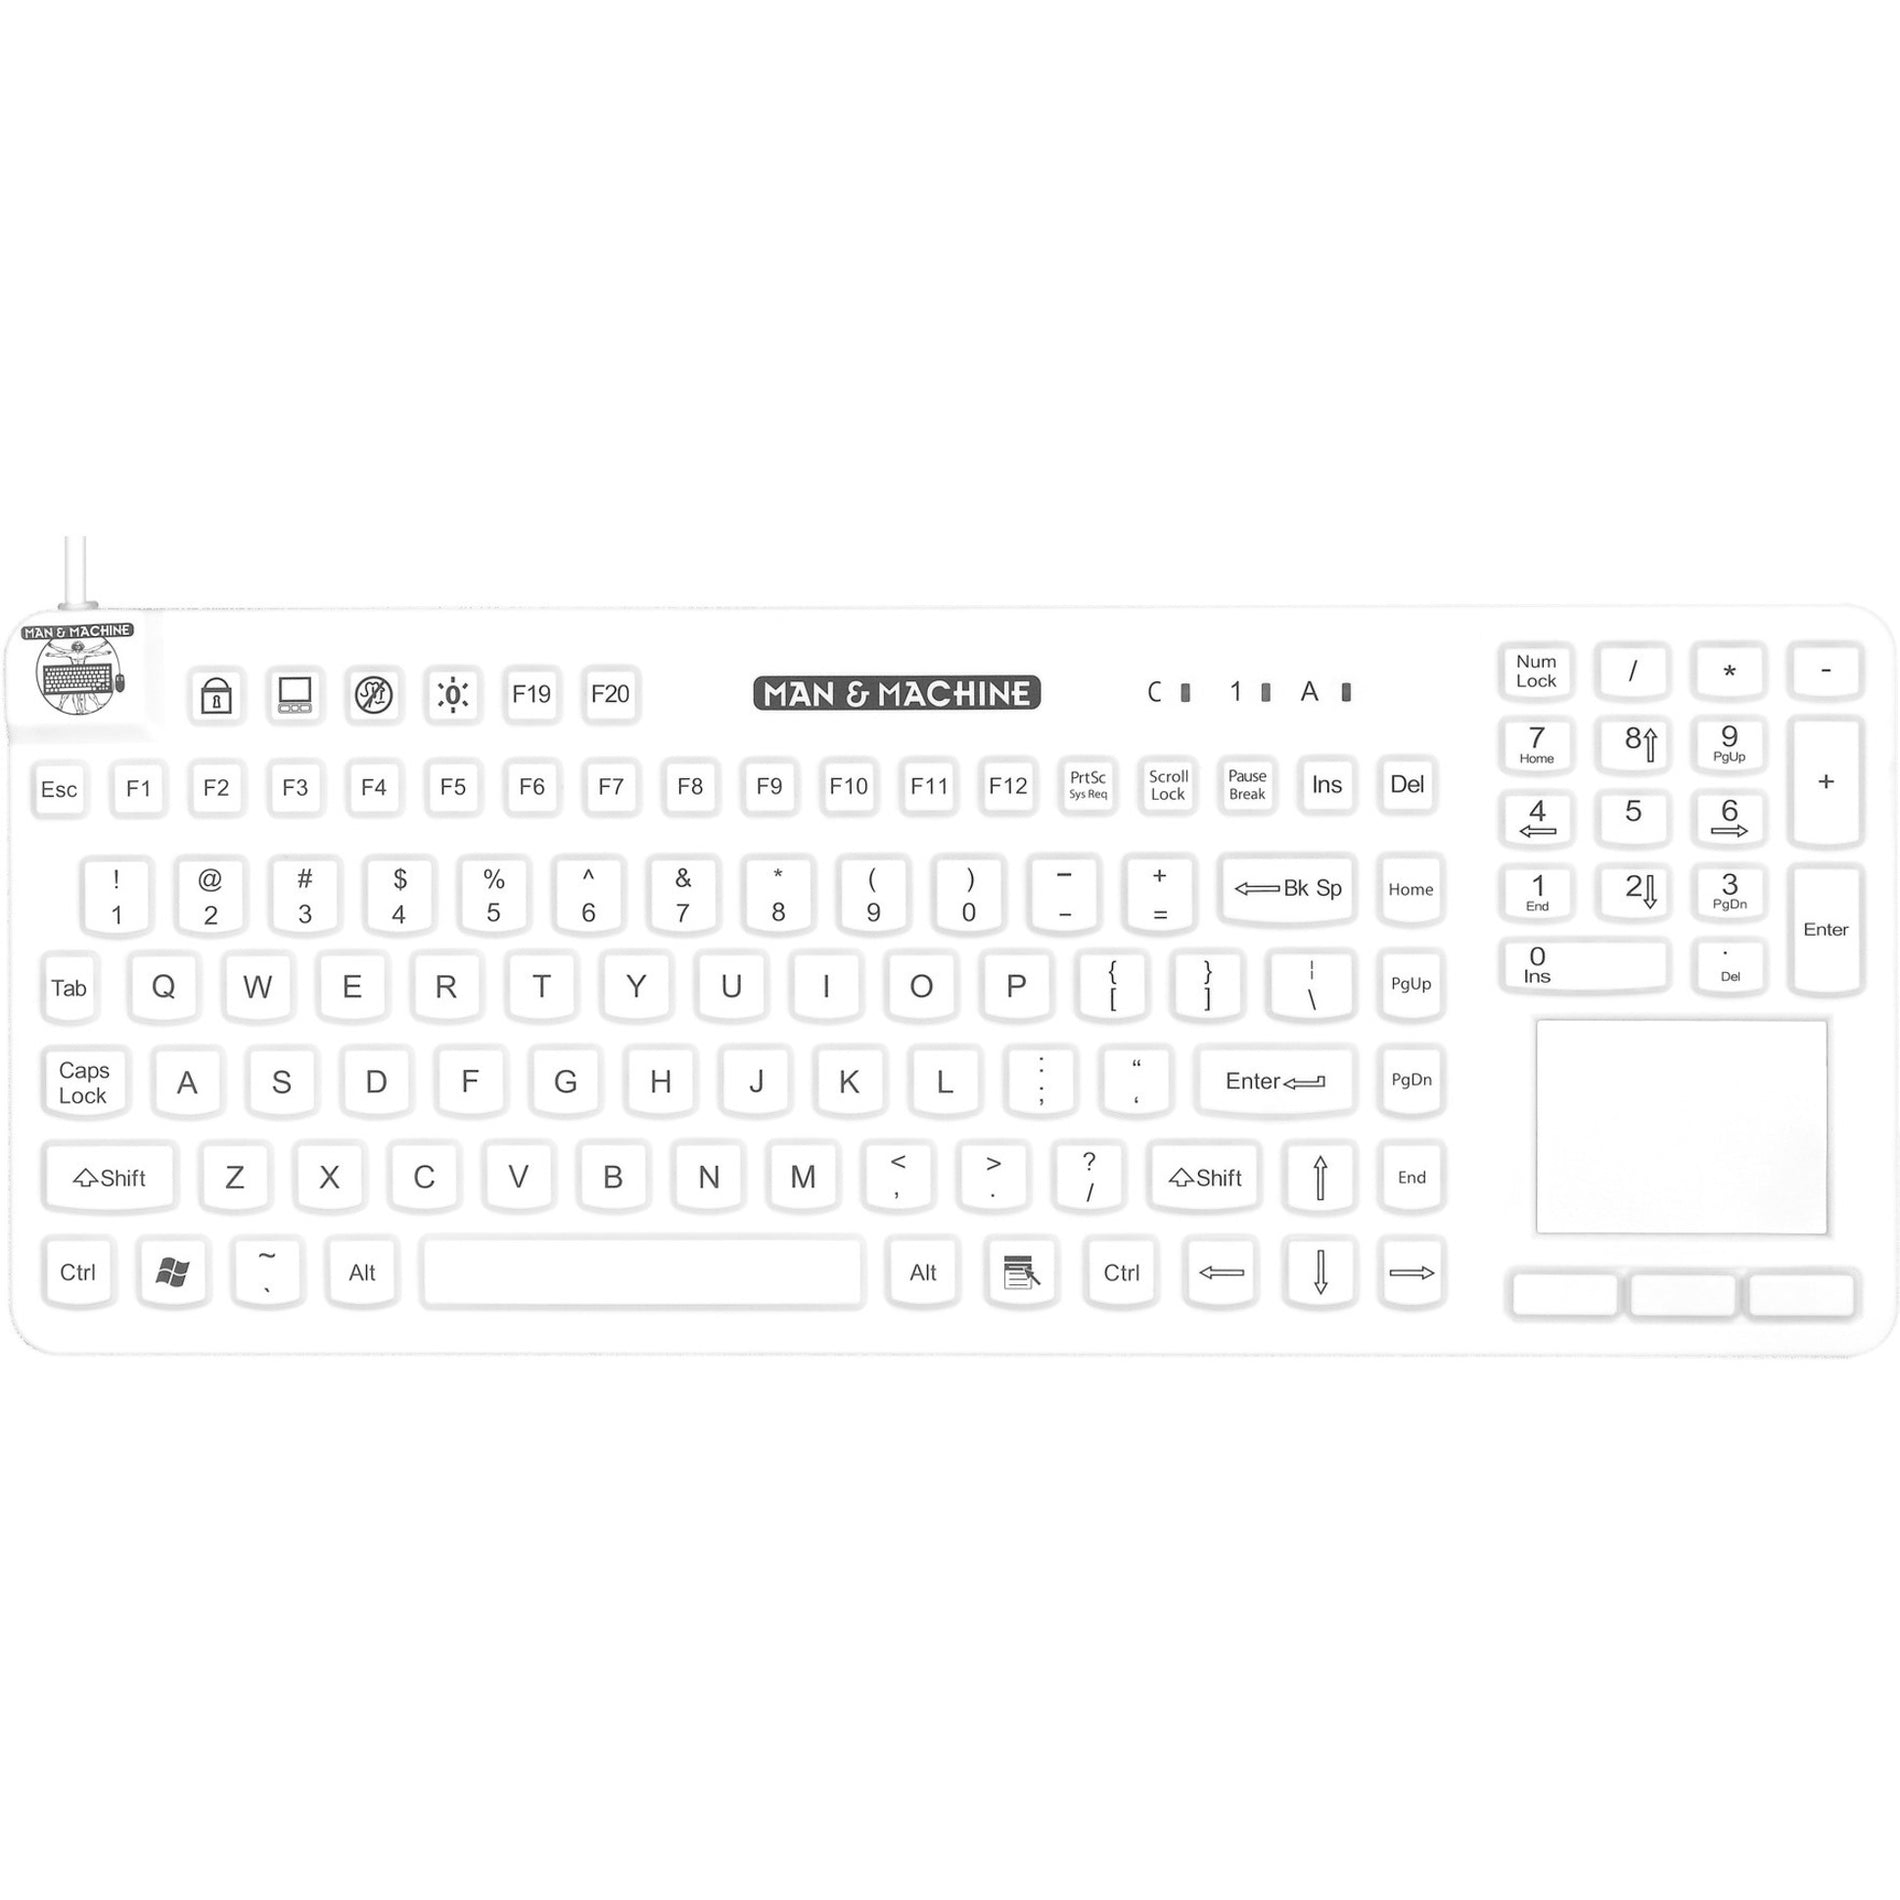 Man & Machine RCTLP/W5 Really Cool Touch Keyboard, Industrial Silicon Rubber, USB Cable, White